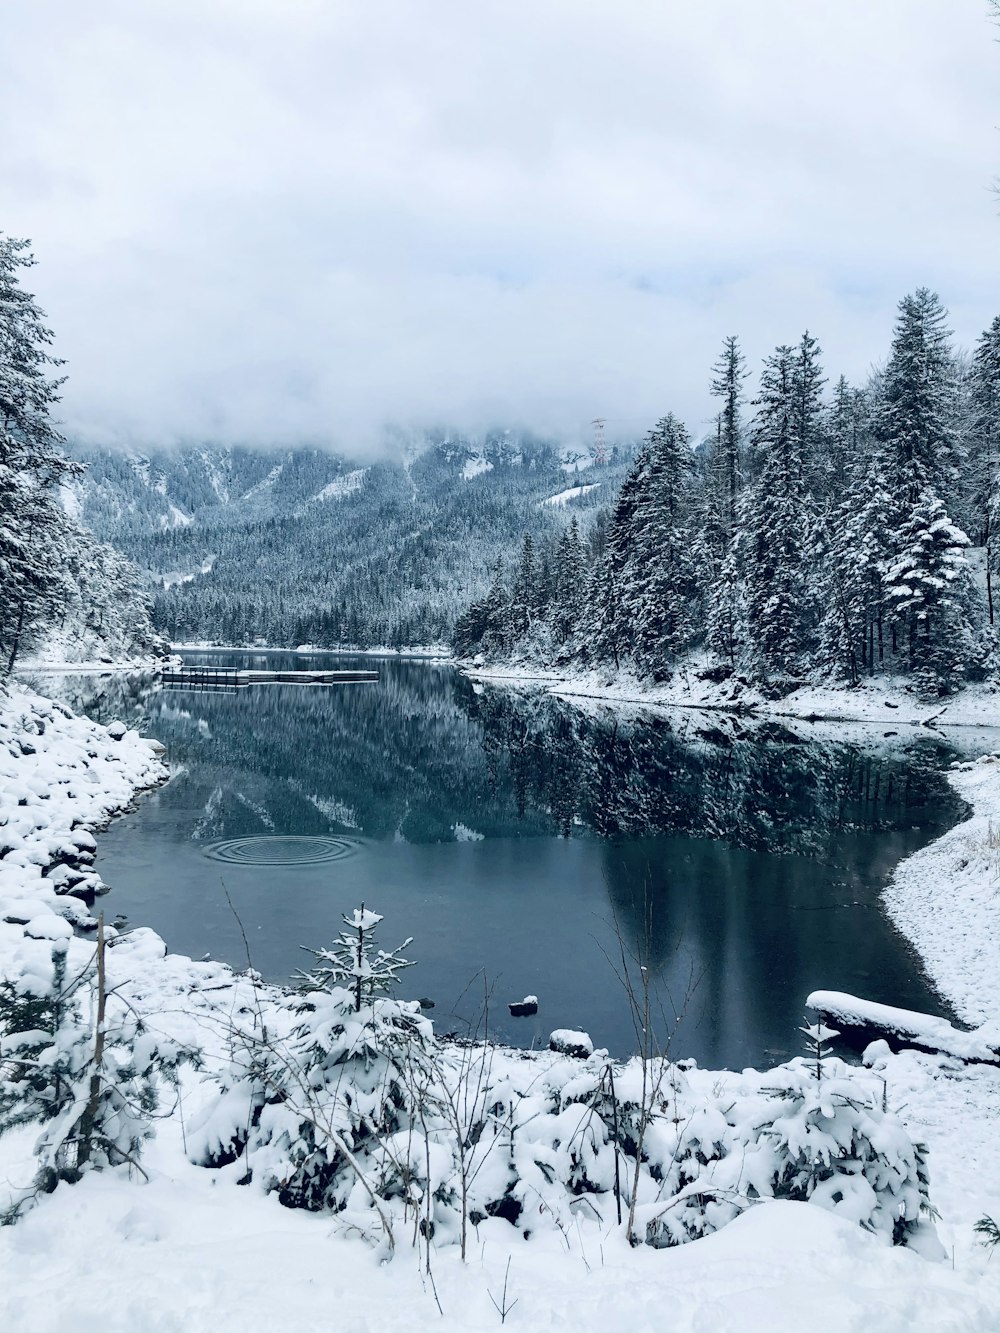 snow covered trees and lake